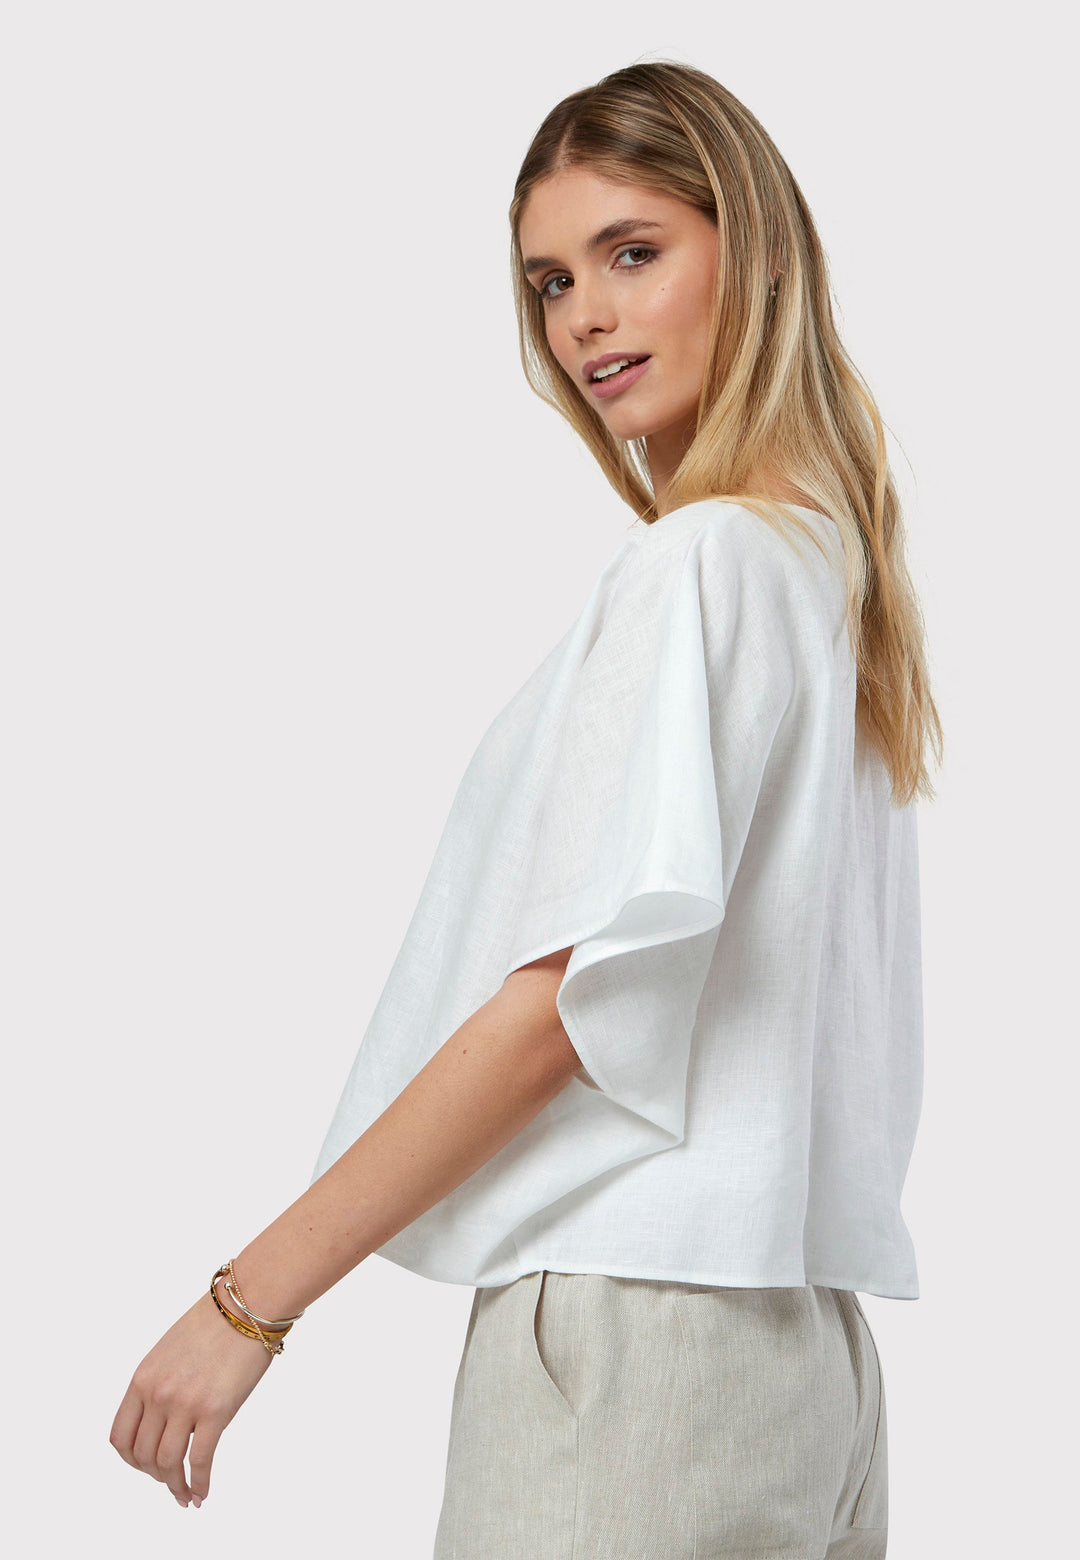 Quinn White Linen Shirt offers an effortless warm-weather look, crafted from breathable pure linen with a flattering v-neck design. Its easy fit ensures summer comfort, complemented by subtle pleat detailing on the back hem for added style.